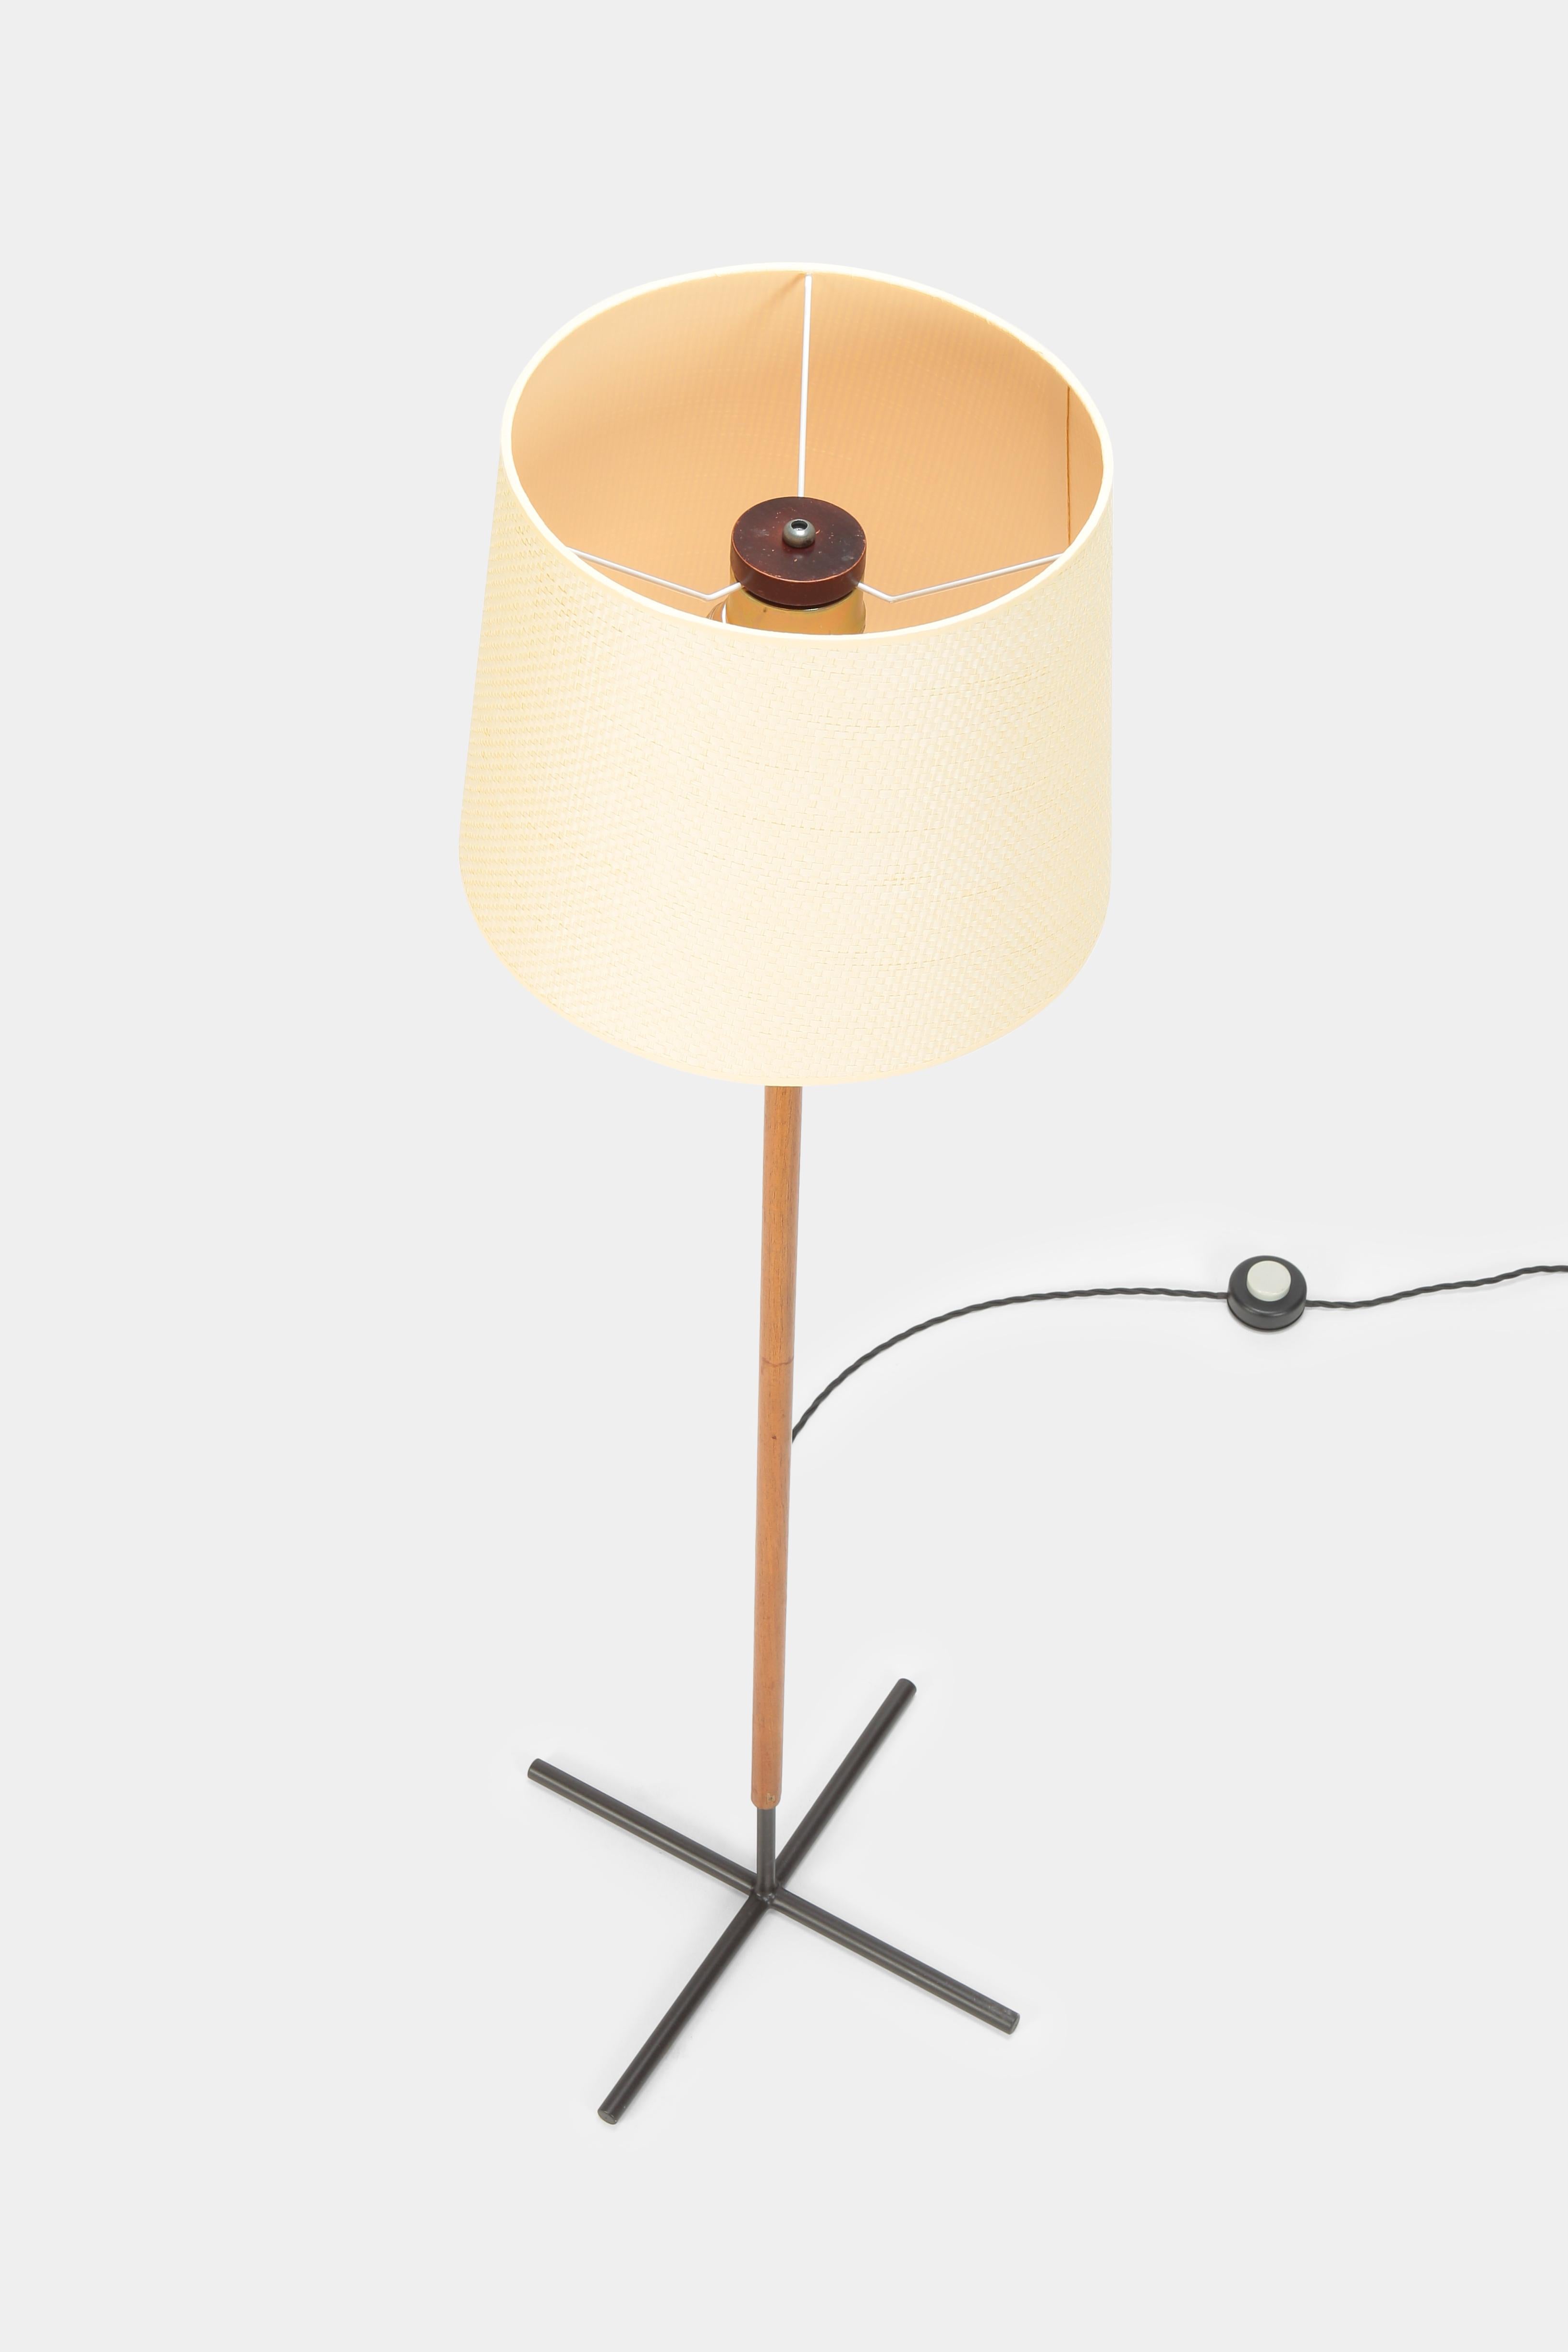 Elegant floor lamp manufactured in the 1950s in Denmark. Black lacquered base, solid teak wood column on top and a new woven lamp shade.